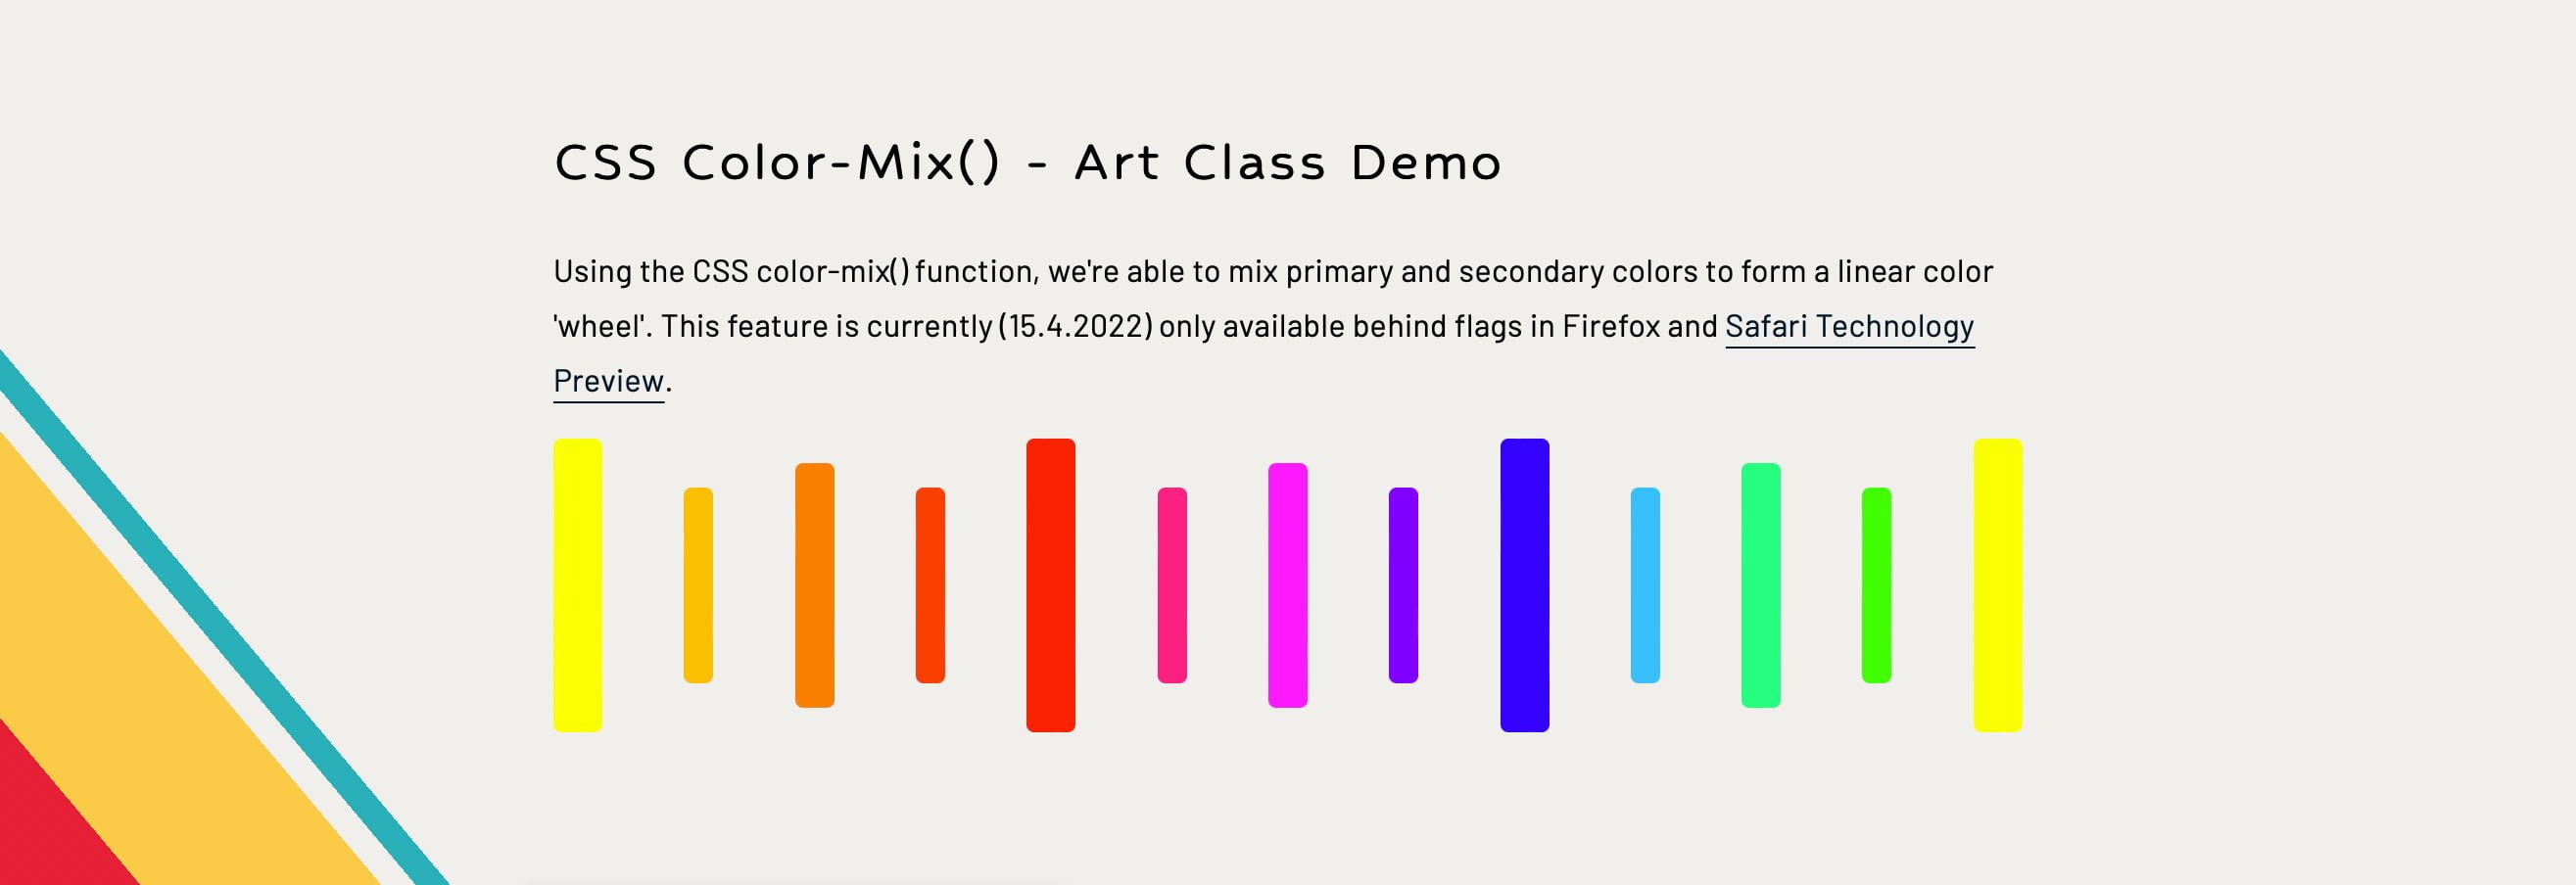 display of colors to show the mixing of primary and secondary colors.